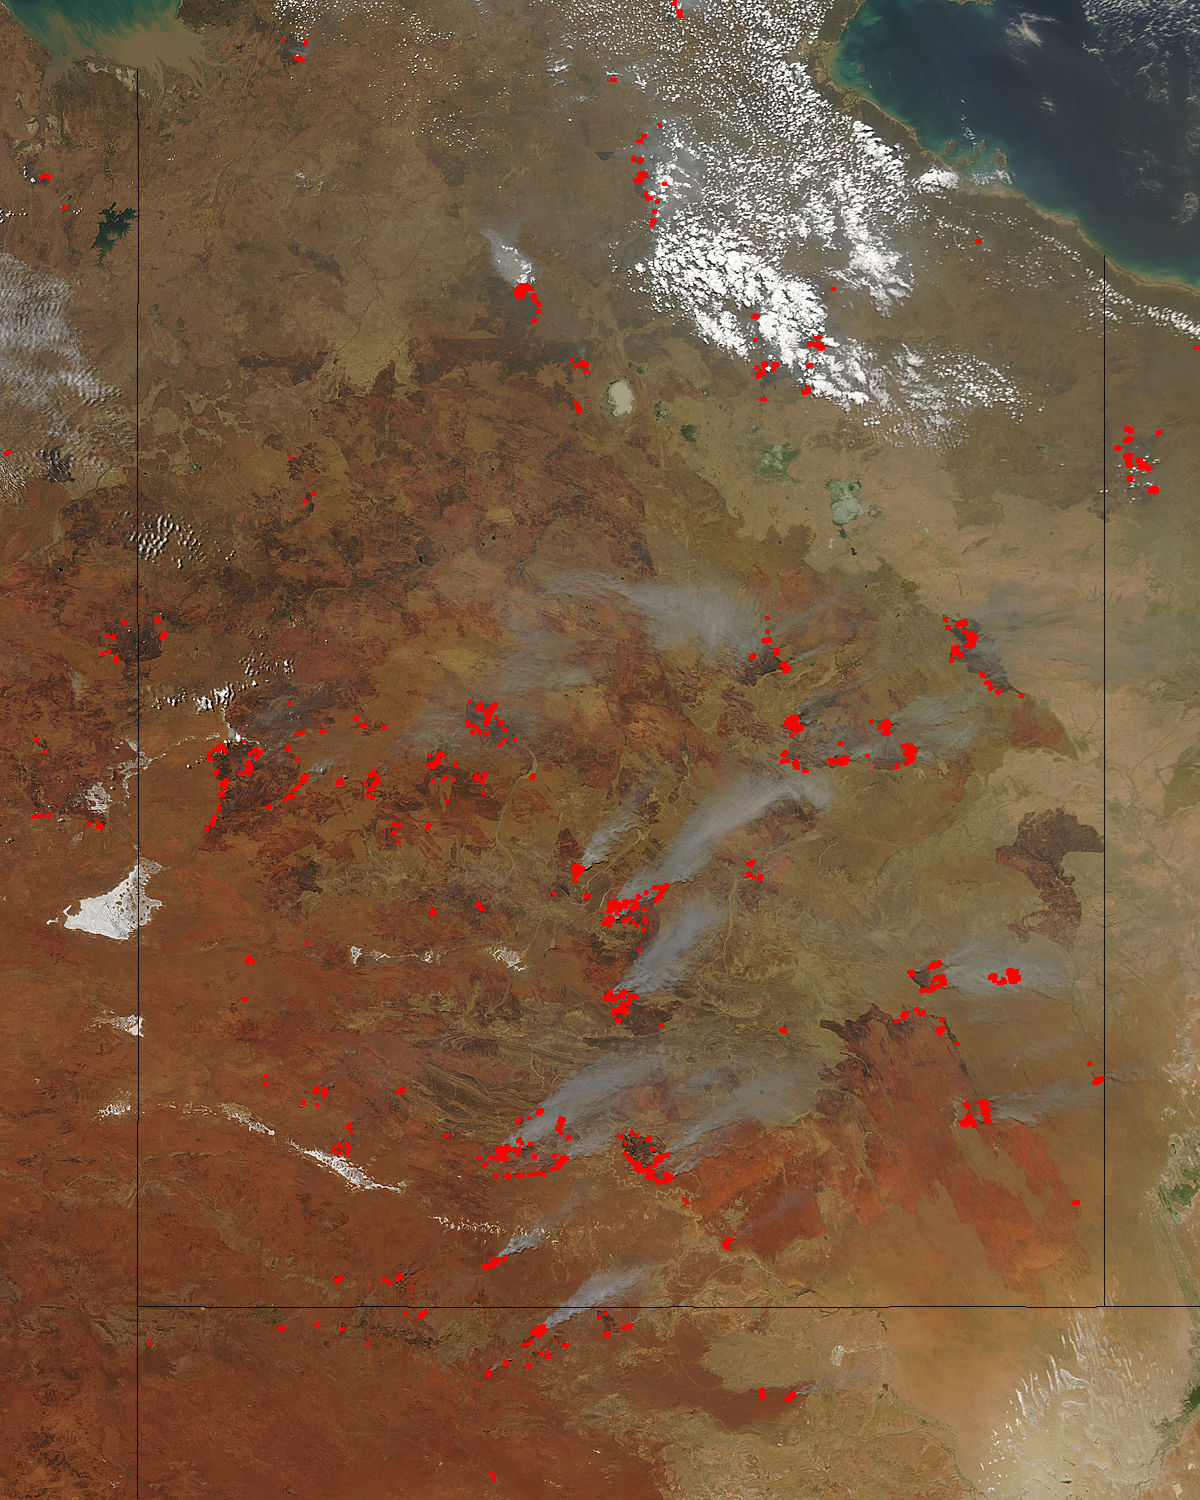 Large fires burned throughout Australia’s Northern Territory